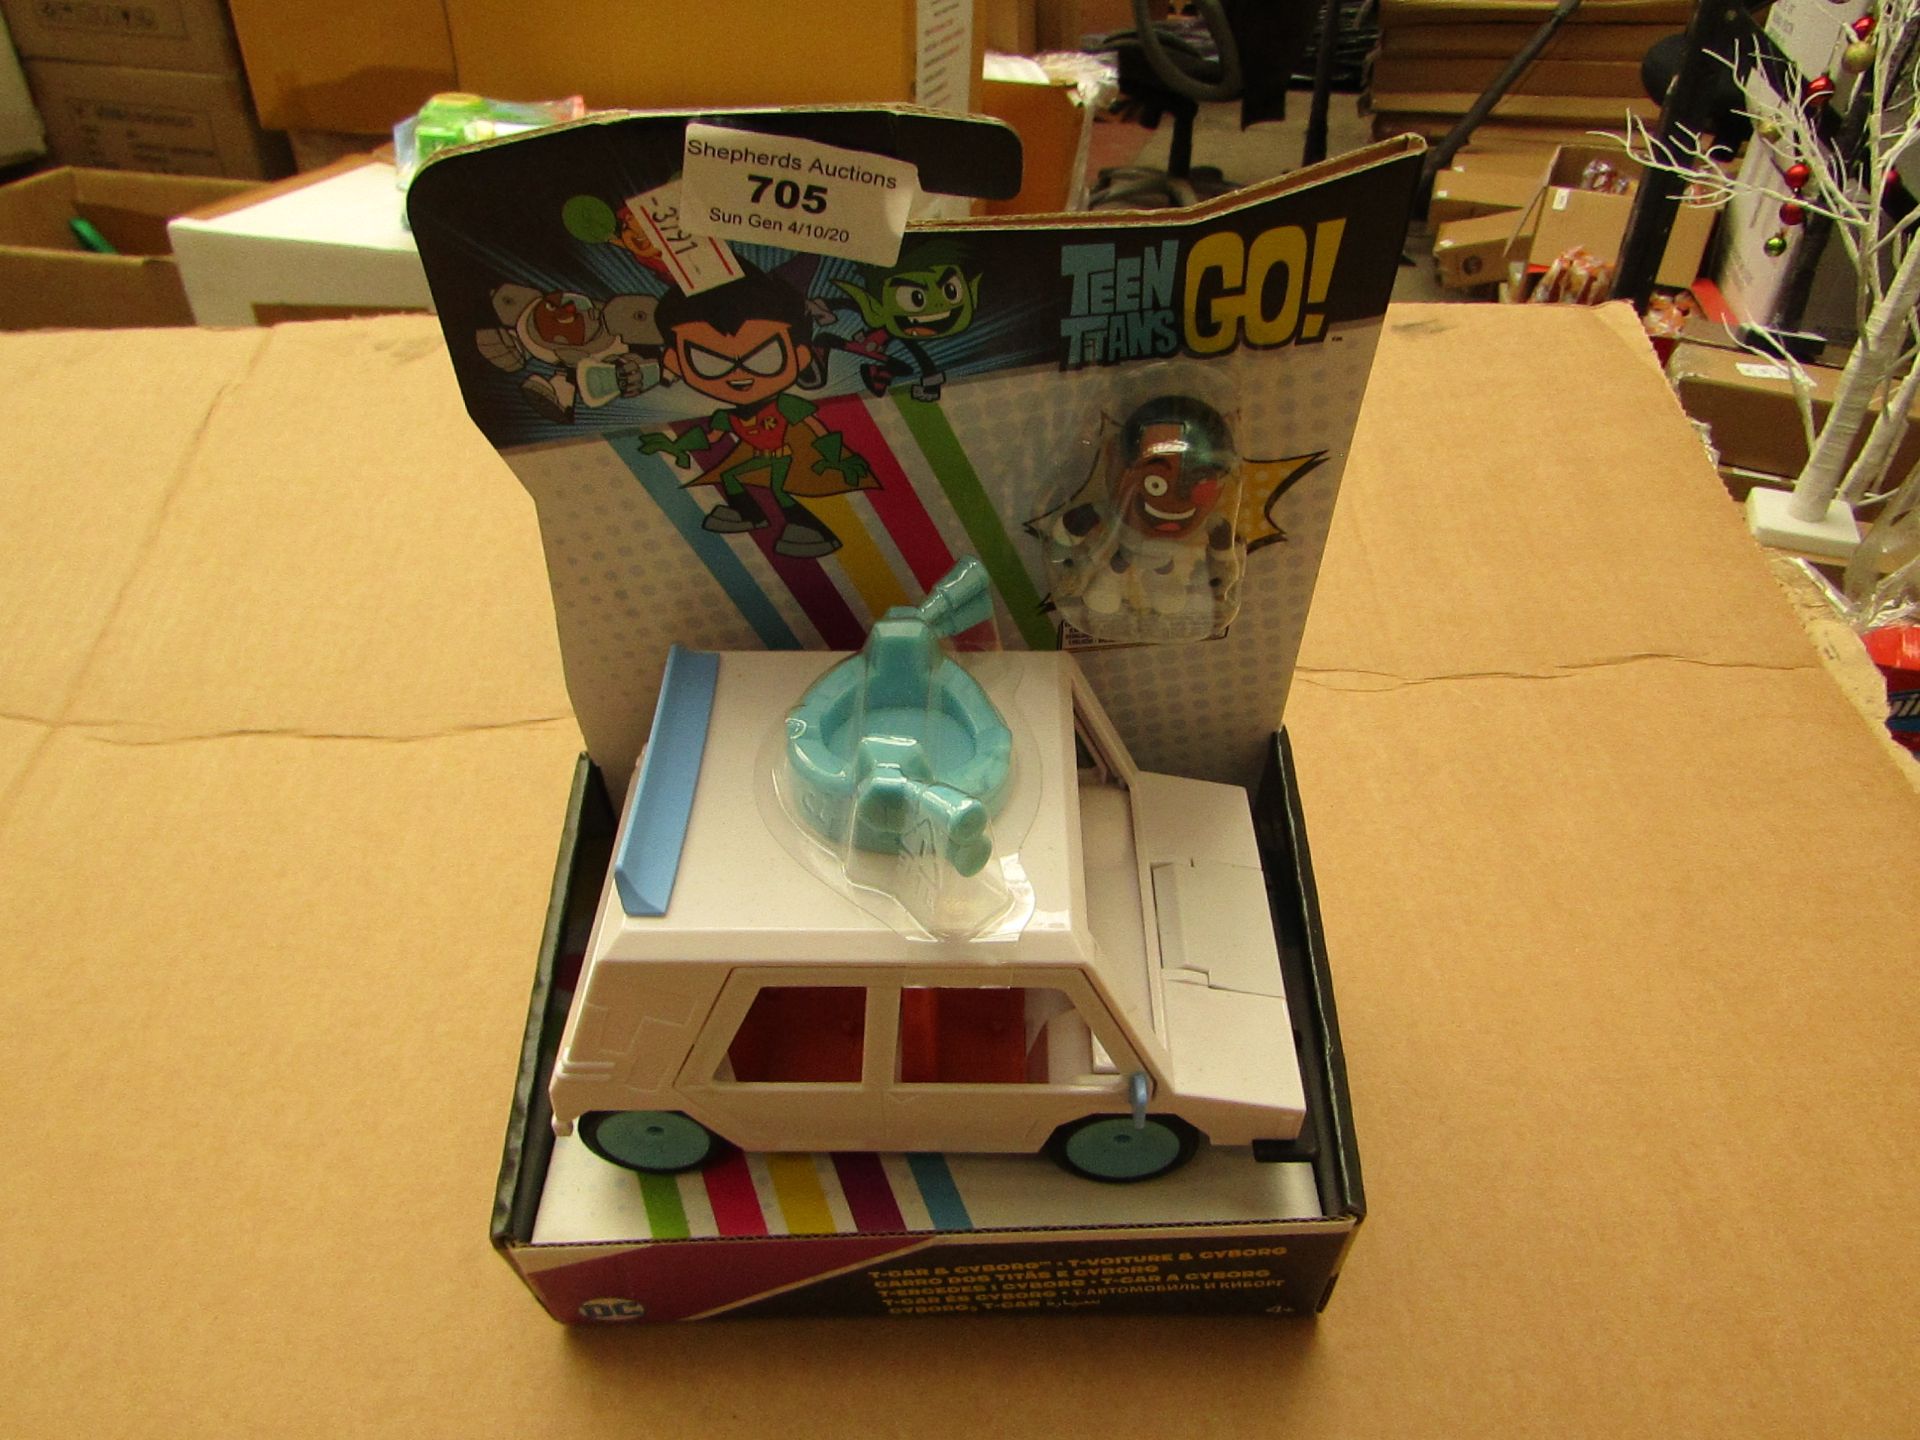 Teen Titans Go Play set, looks unused and boxed.